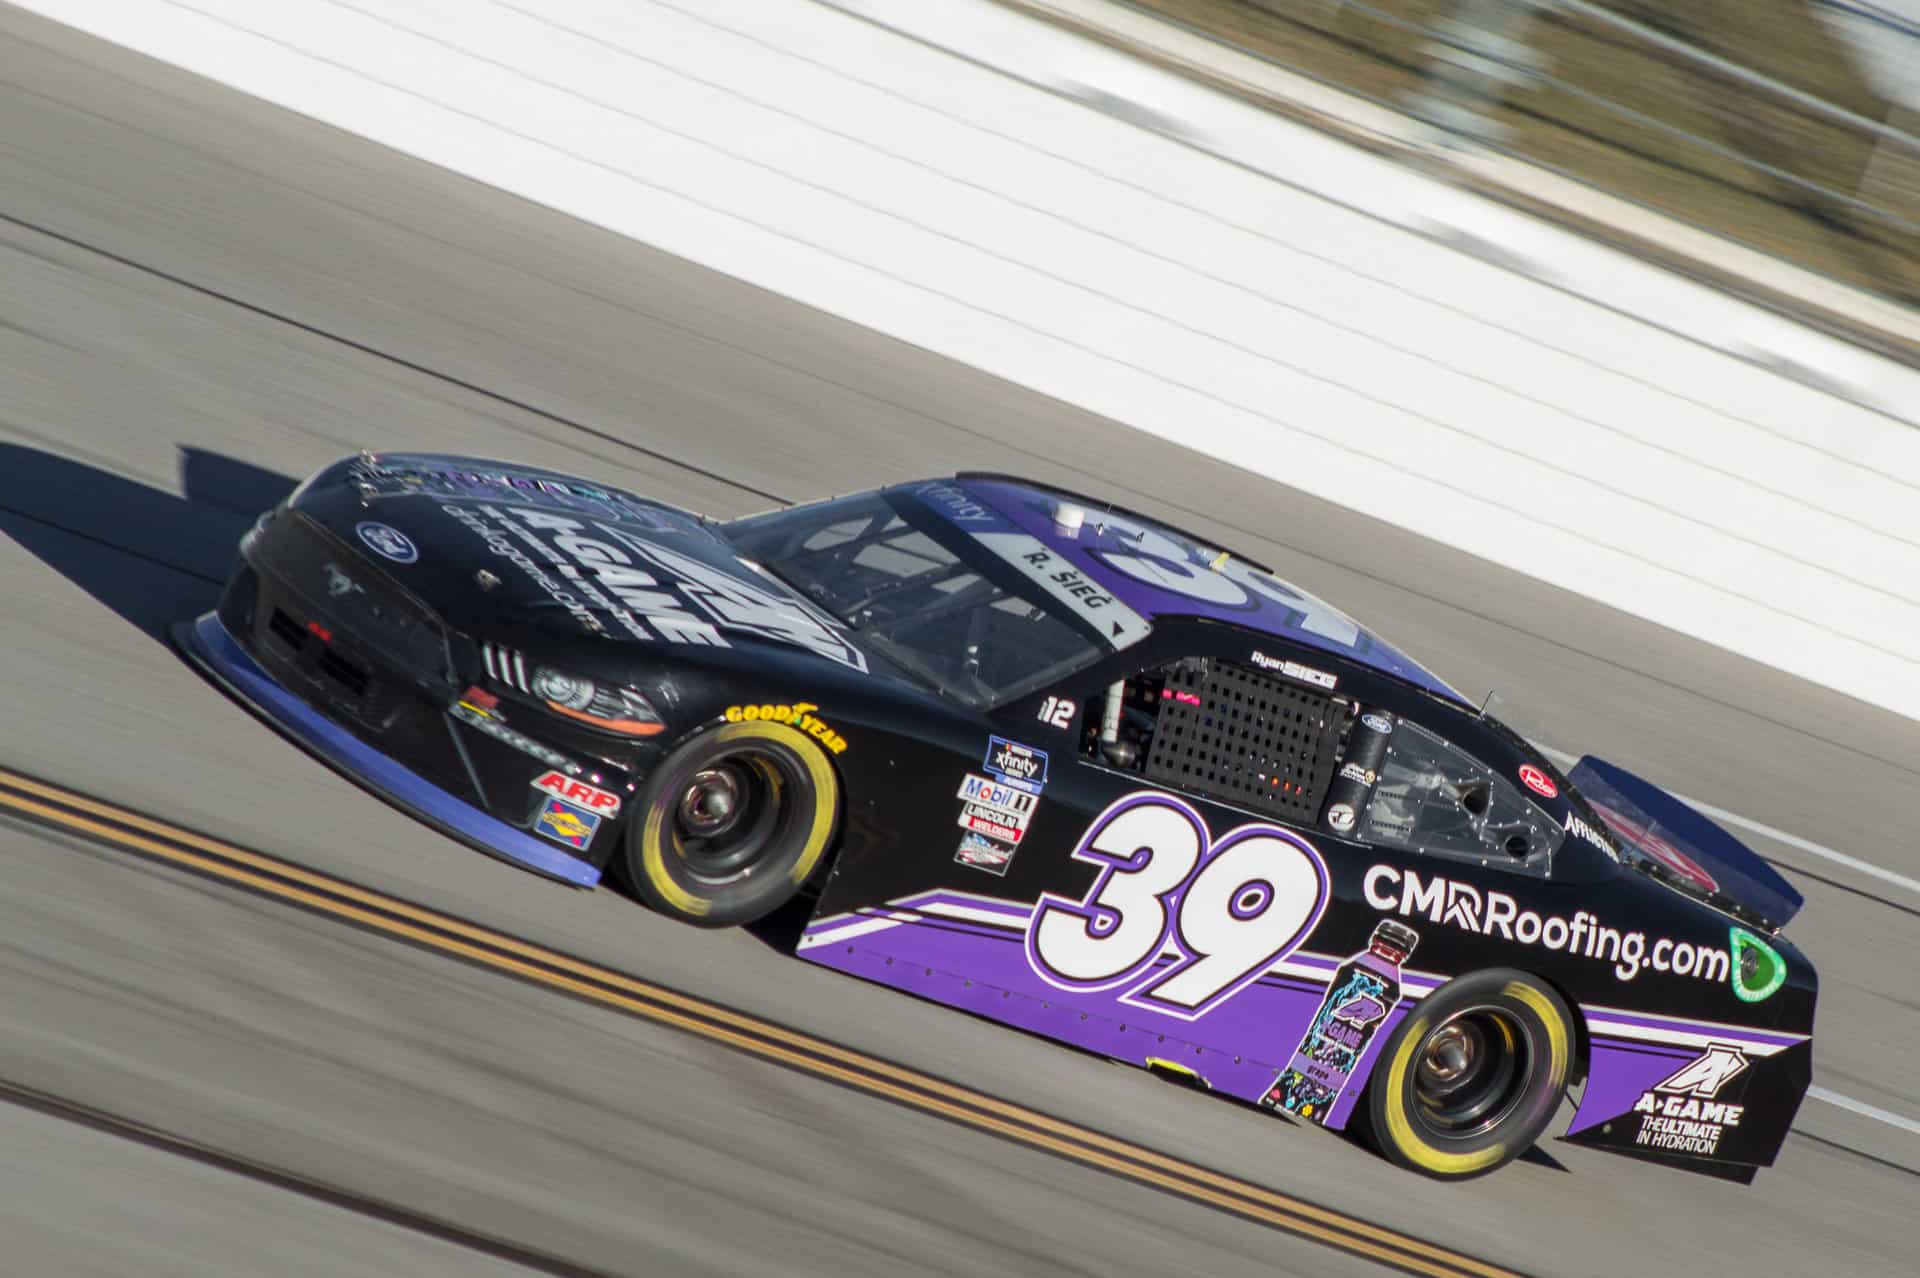 Ryan Sieg scored a top-five finish at Talladega Superspeedway and leaves on the NASCAR Xfinity Series Playoff cutline.